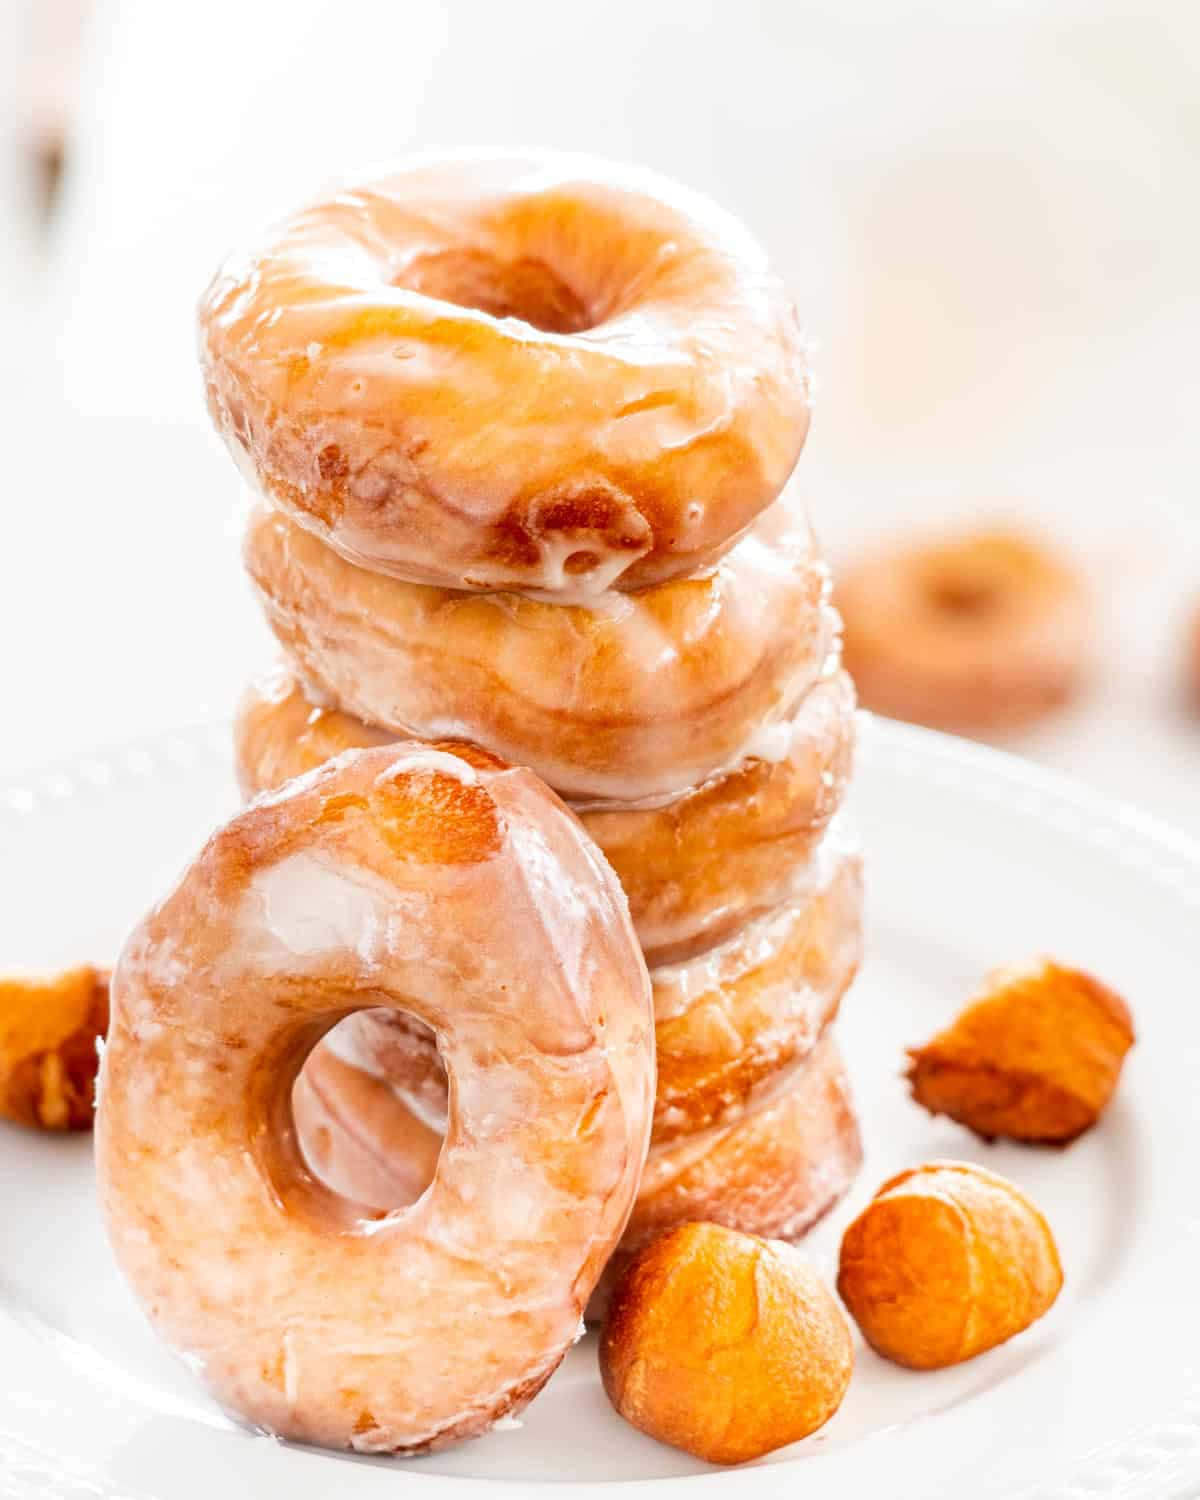 Enjoy a freshly-glazed donut and a cup of freshly brewed java.